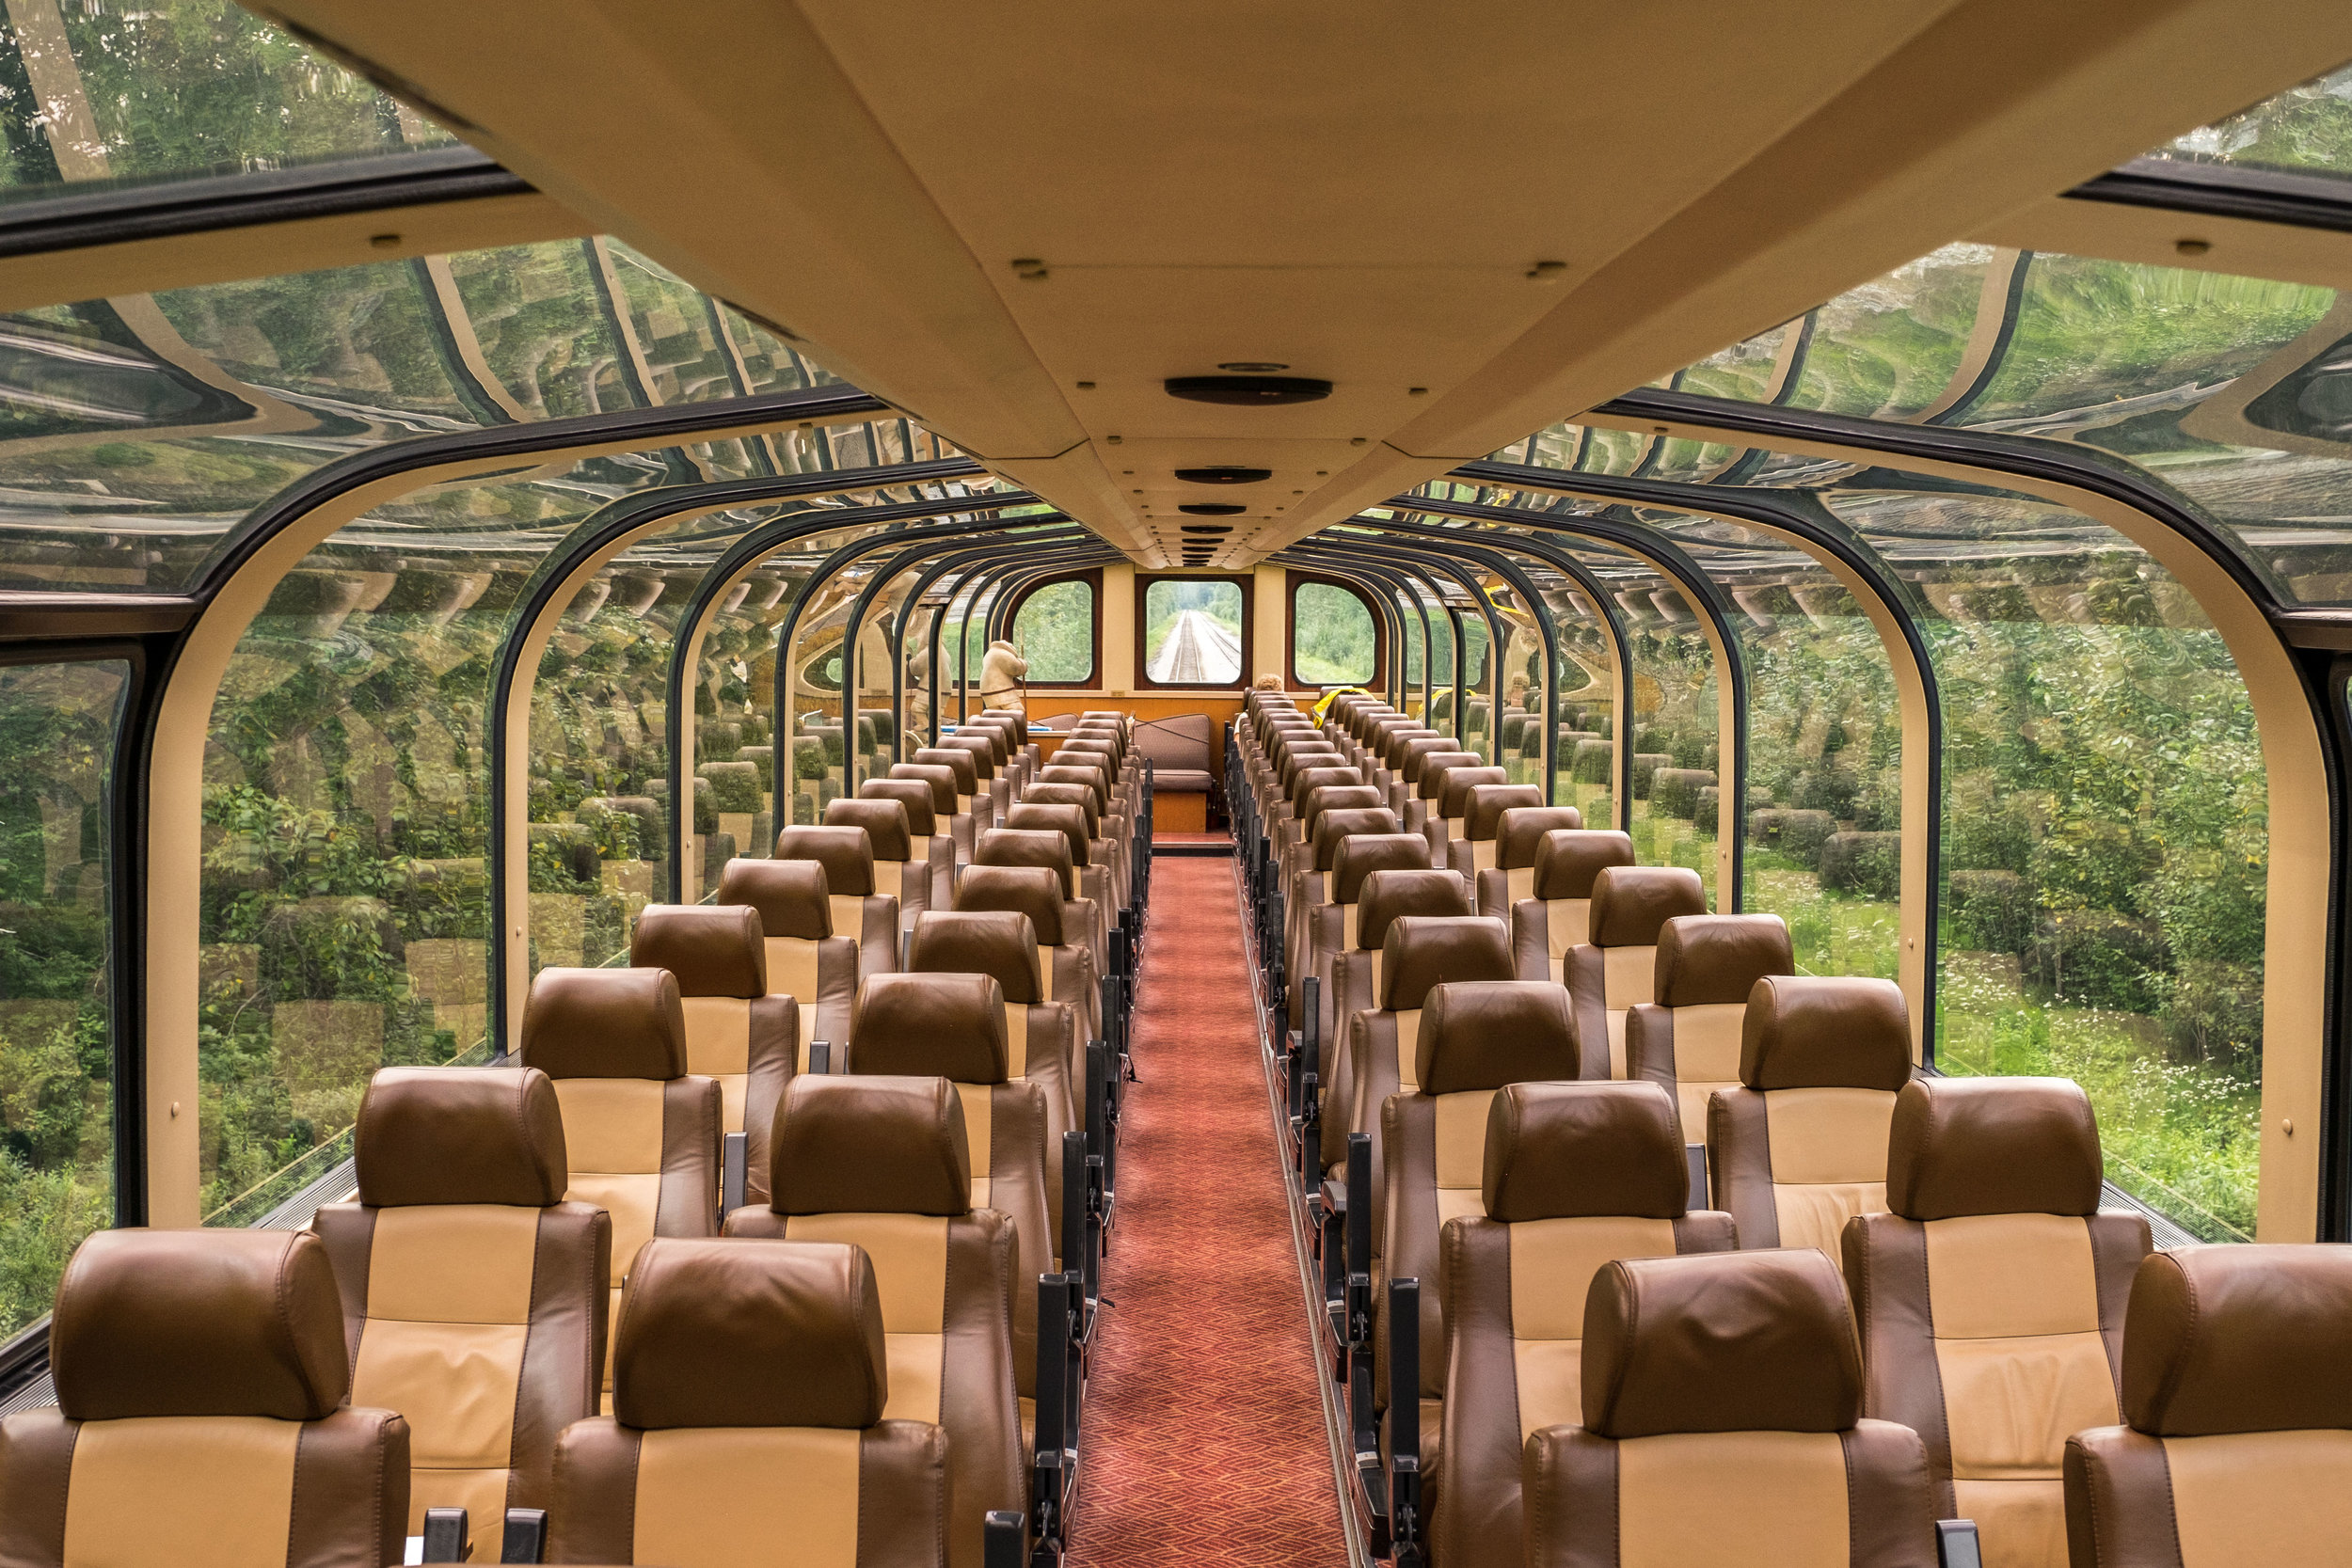  The glass ceiling dome car in the Wilderness Express Train allows for views of the Alaska wilderness in every direction.&nbsp; 